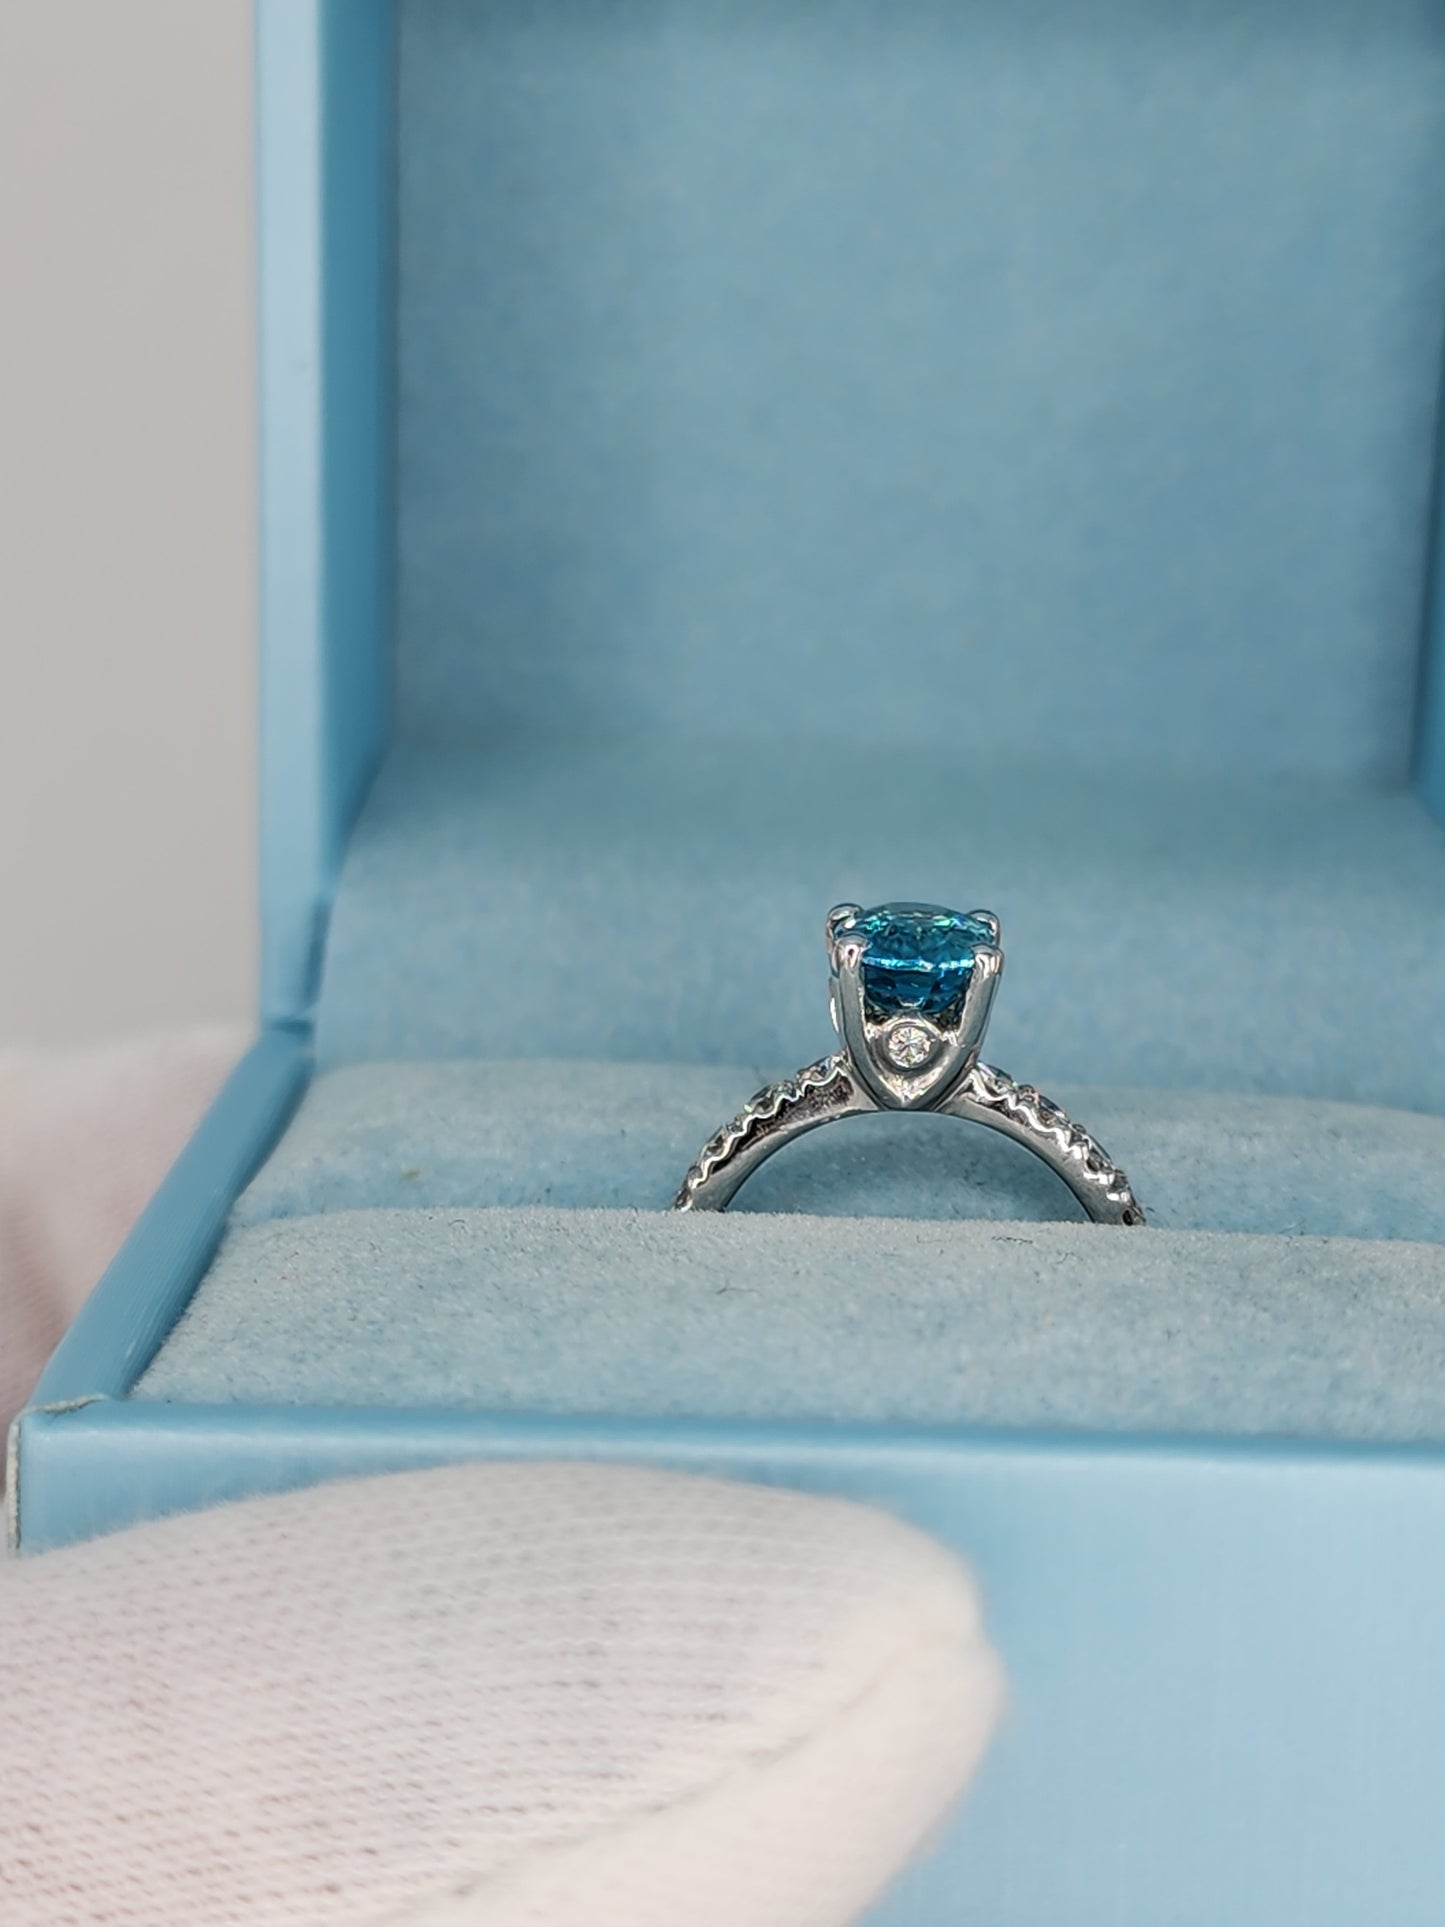 Natural 2.24 ct Blue Zircon and Diamond Ring in 14k White Gold